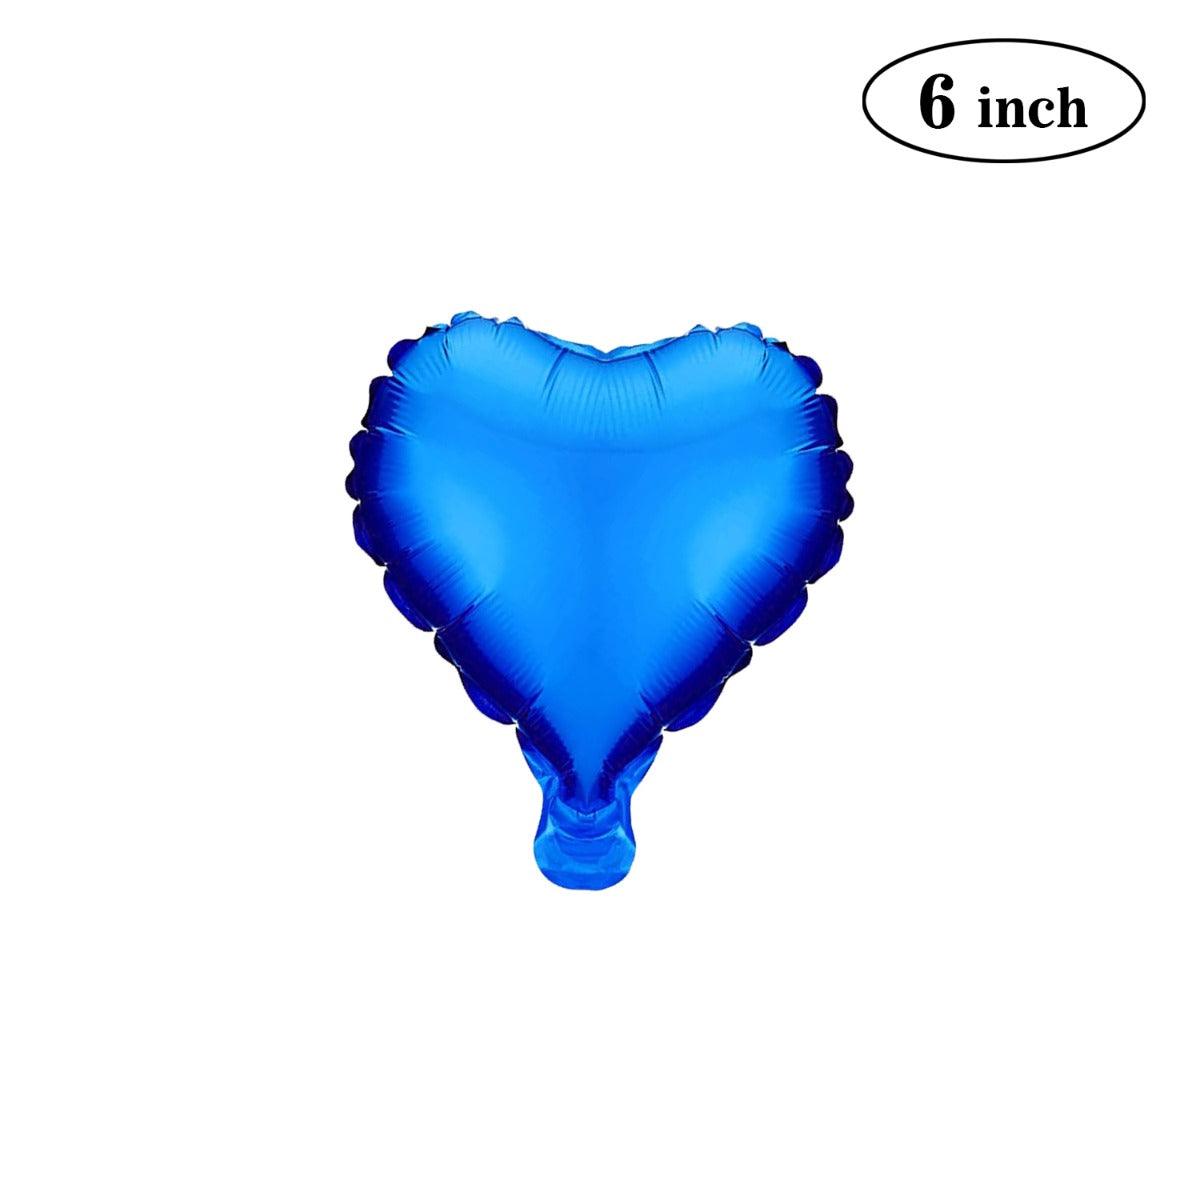 PartyCorp 6 Inch Blue Heart Foil Balloon, 1 pc